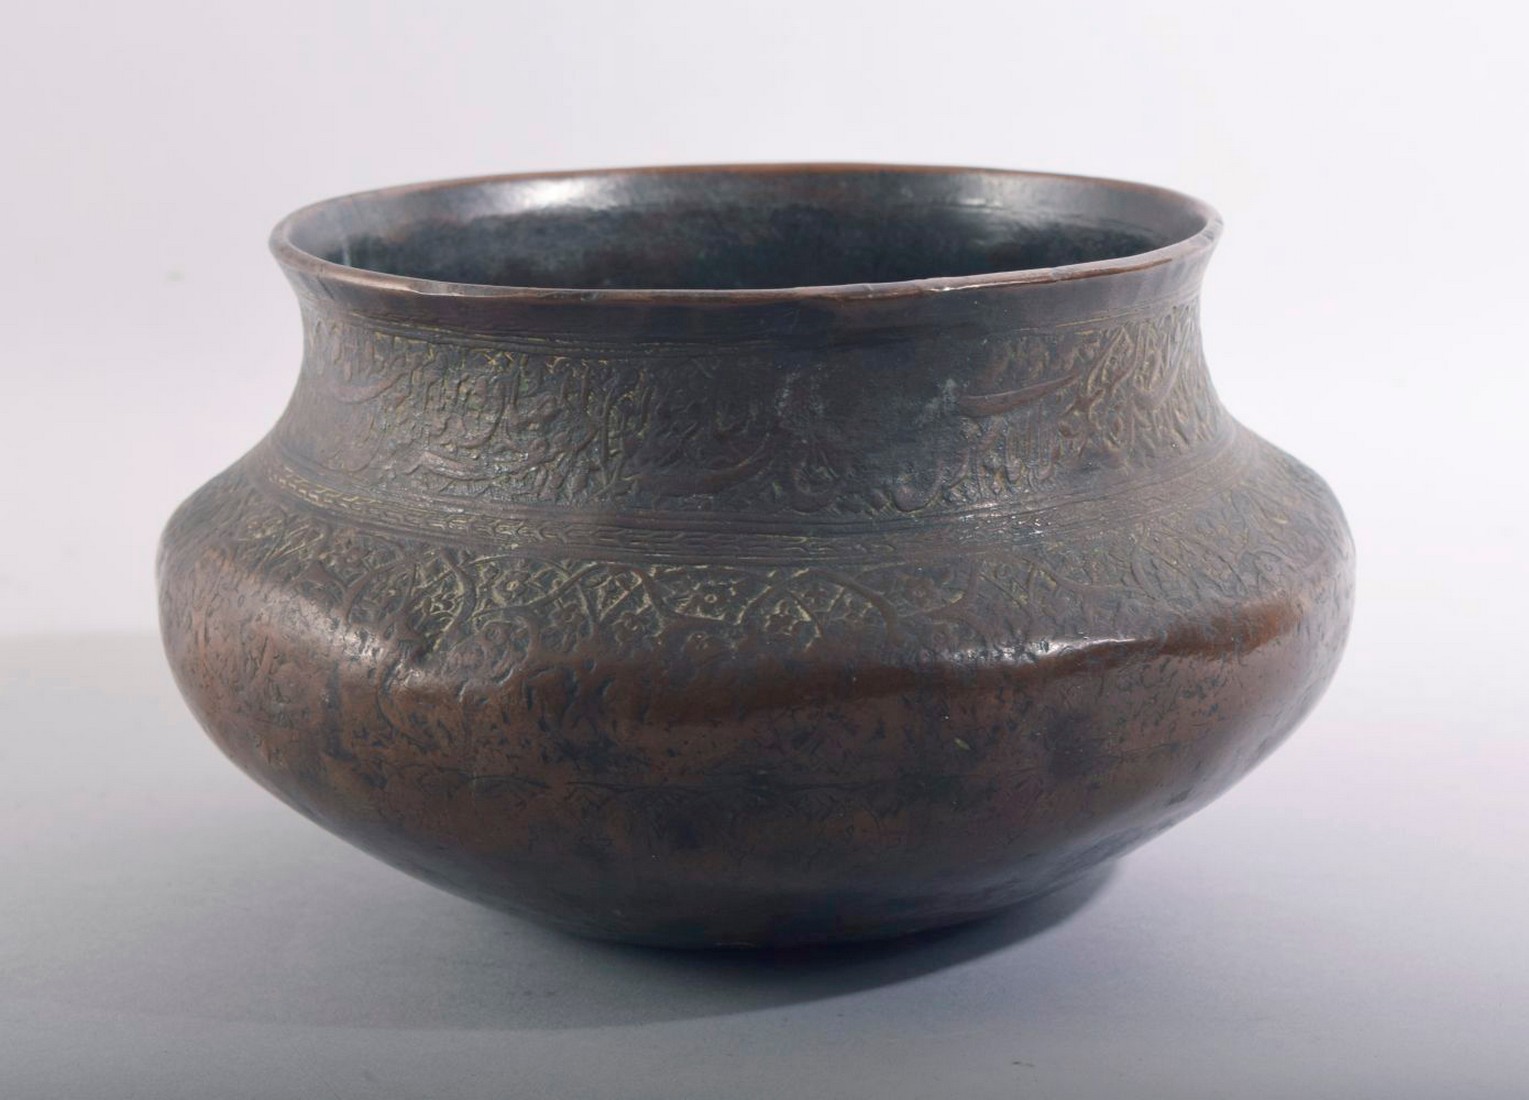 A GOOD ISLAMIC QAJAR ENGRAVED AND CHASED BRONZE BOWL, the rim engraved with a band of calligraphy